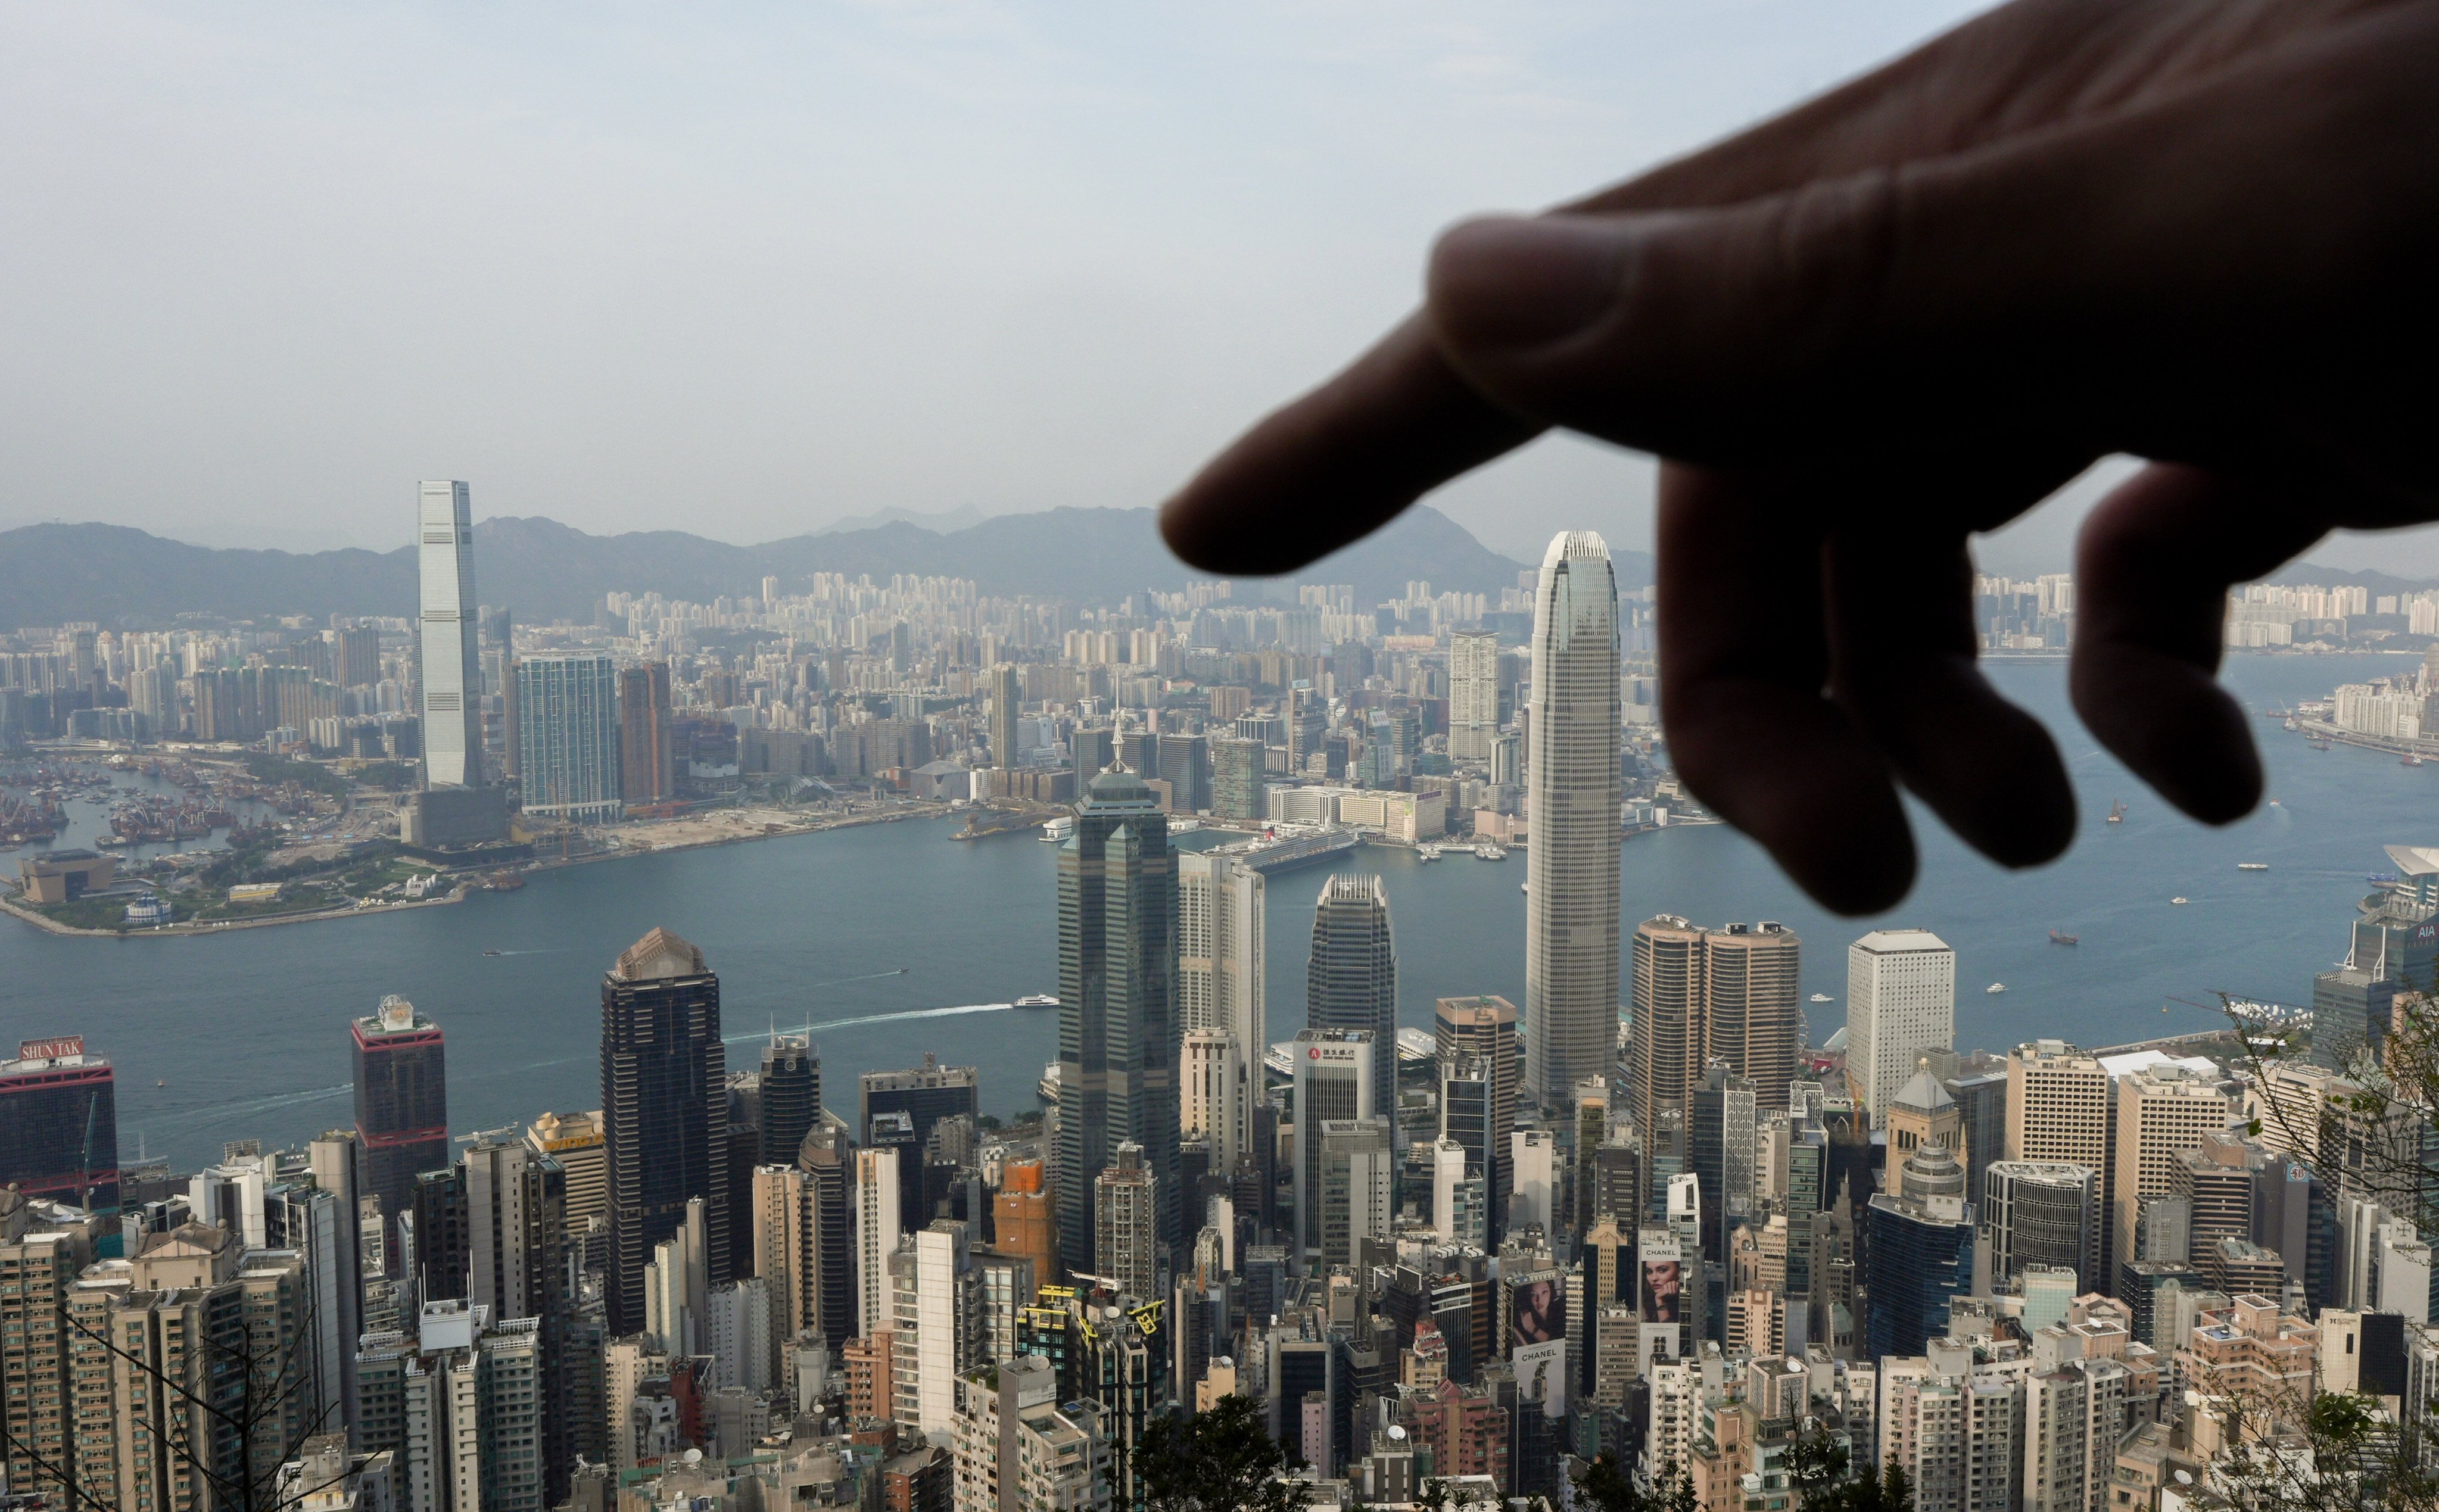 Hong Kong’s Hang Seng Index has risen almost 8 per cent over the past month, beating all other major equity gauges in the world. Photo: Eugene Lee